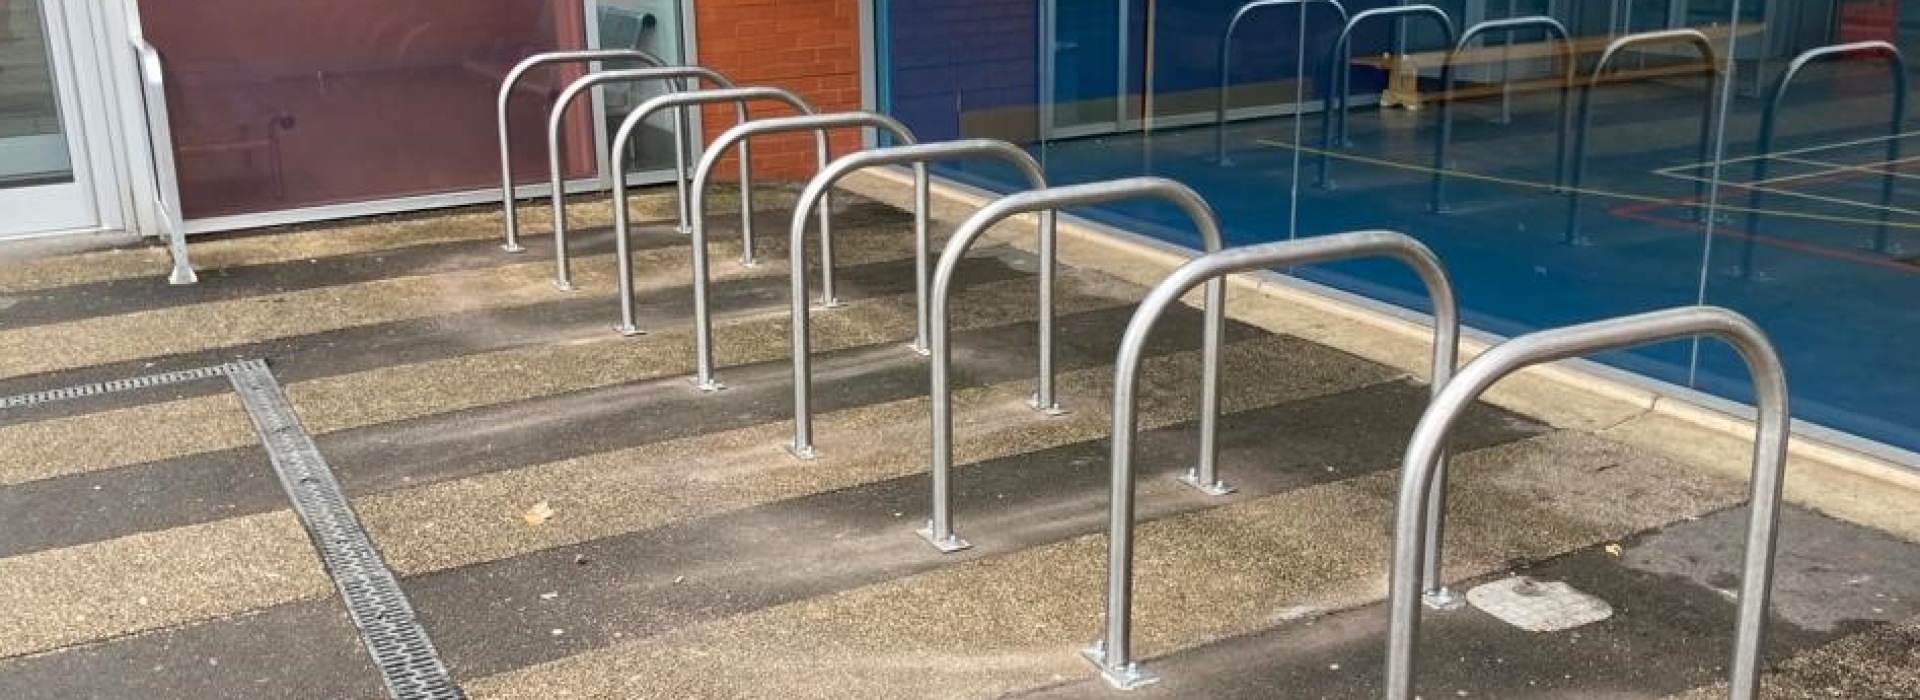 Taziker and Network Rail Donate Bicycle Racks to Bristol Schools